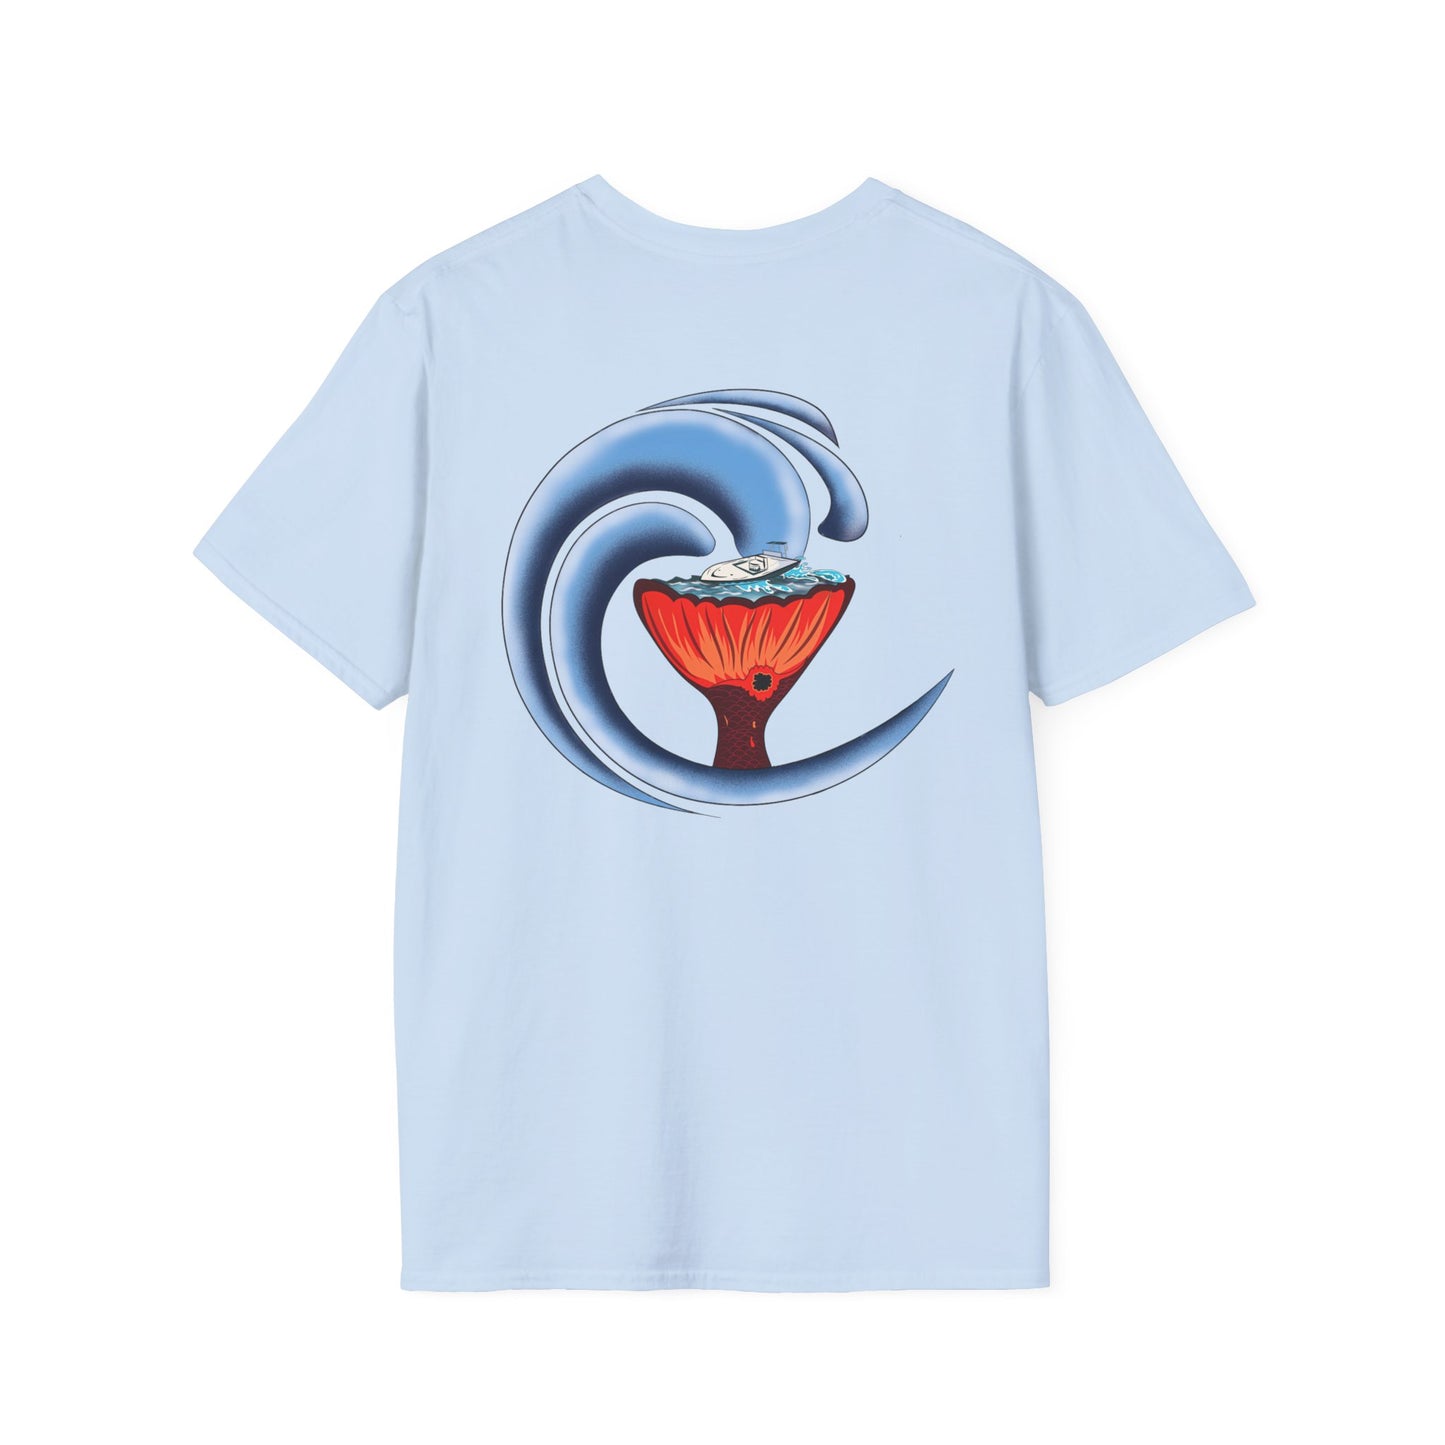 Tails Up Redfish T-Shirt